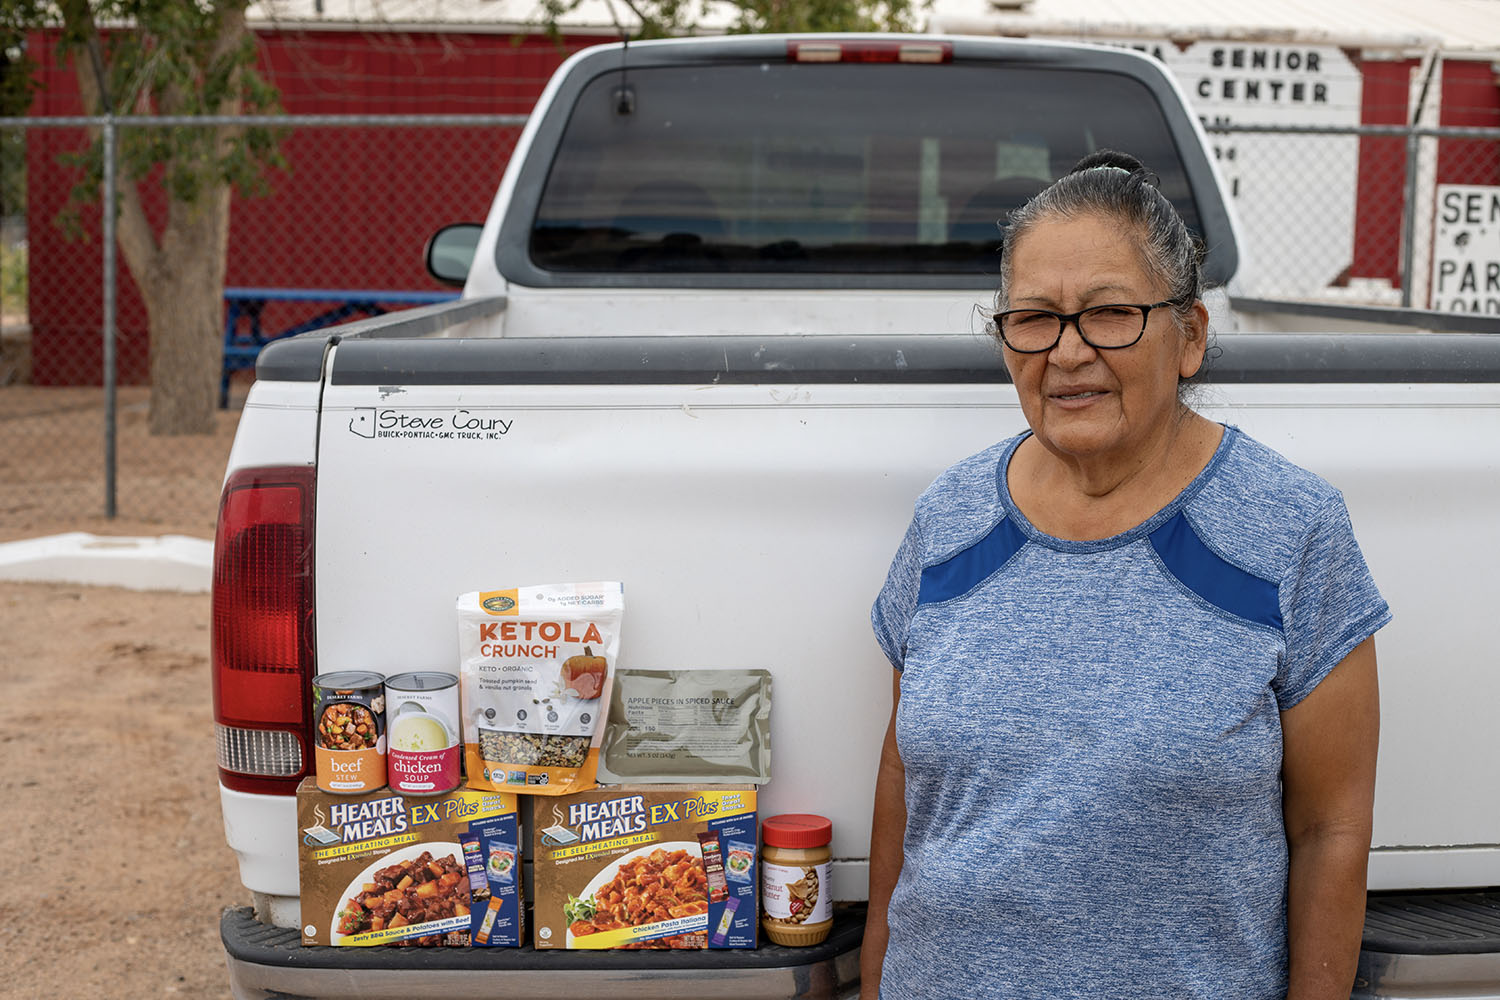 PWNA provides emergency winter goods to protect Elders: